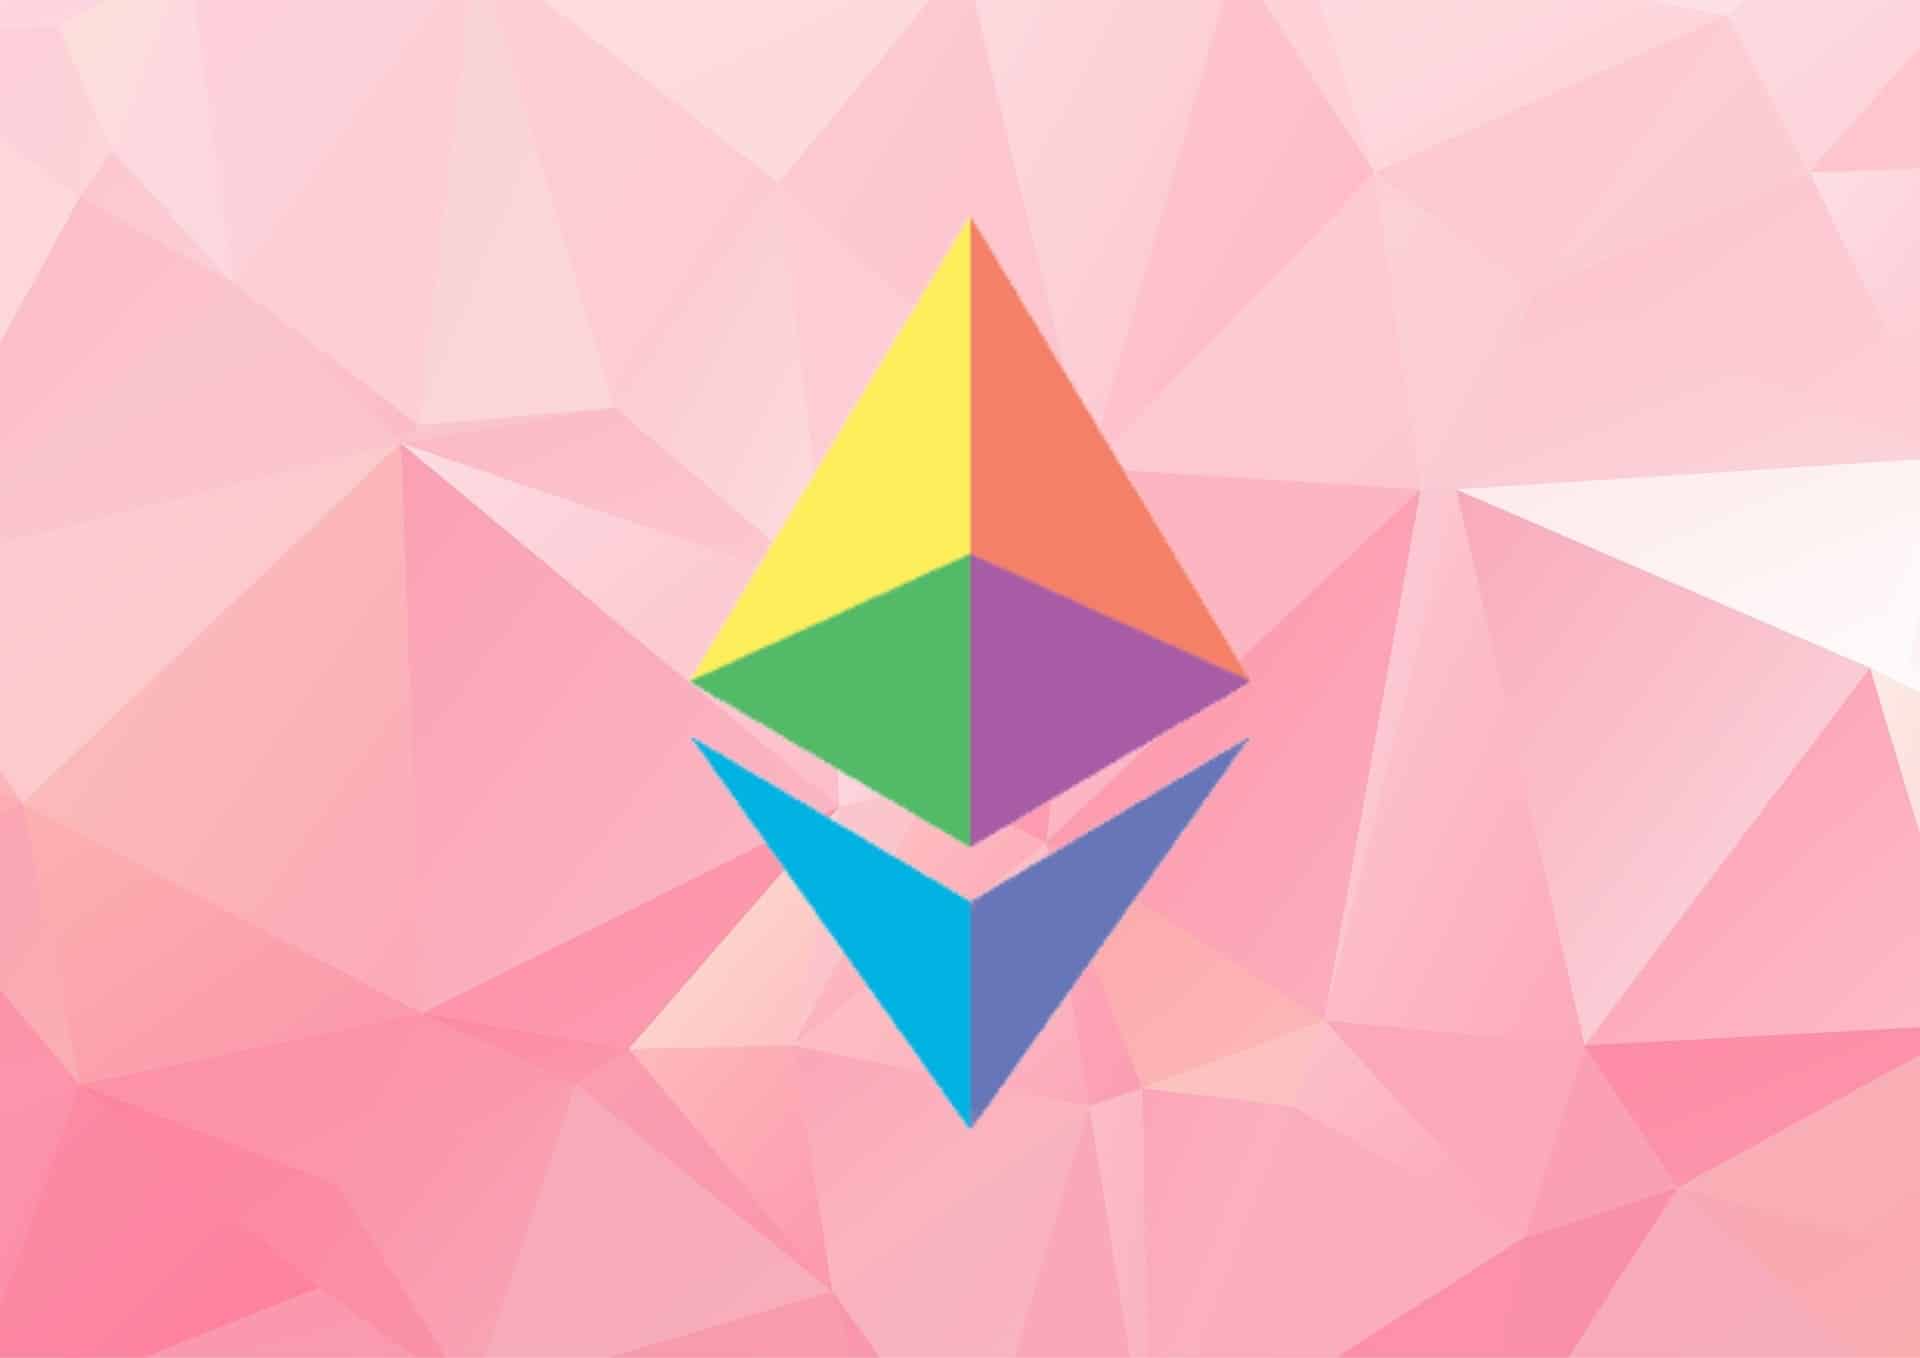 Ethereum price could rally to as high as $22,000 by 2030 driven by its dominance as a "dapp store" and spot ETH ETFs approval